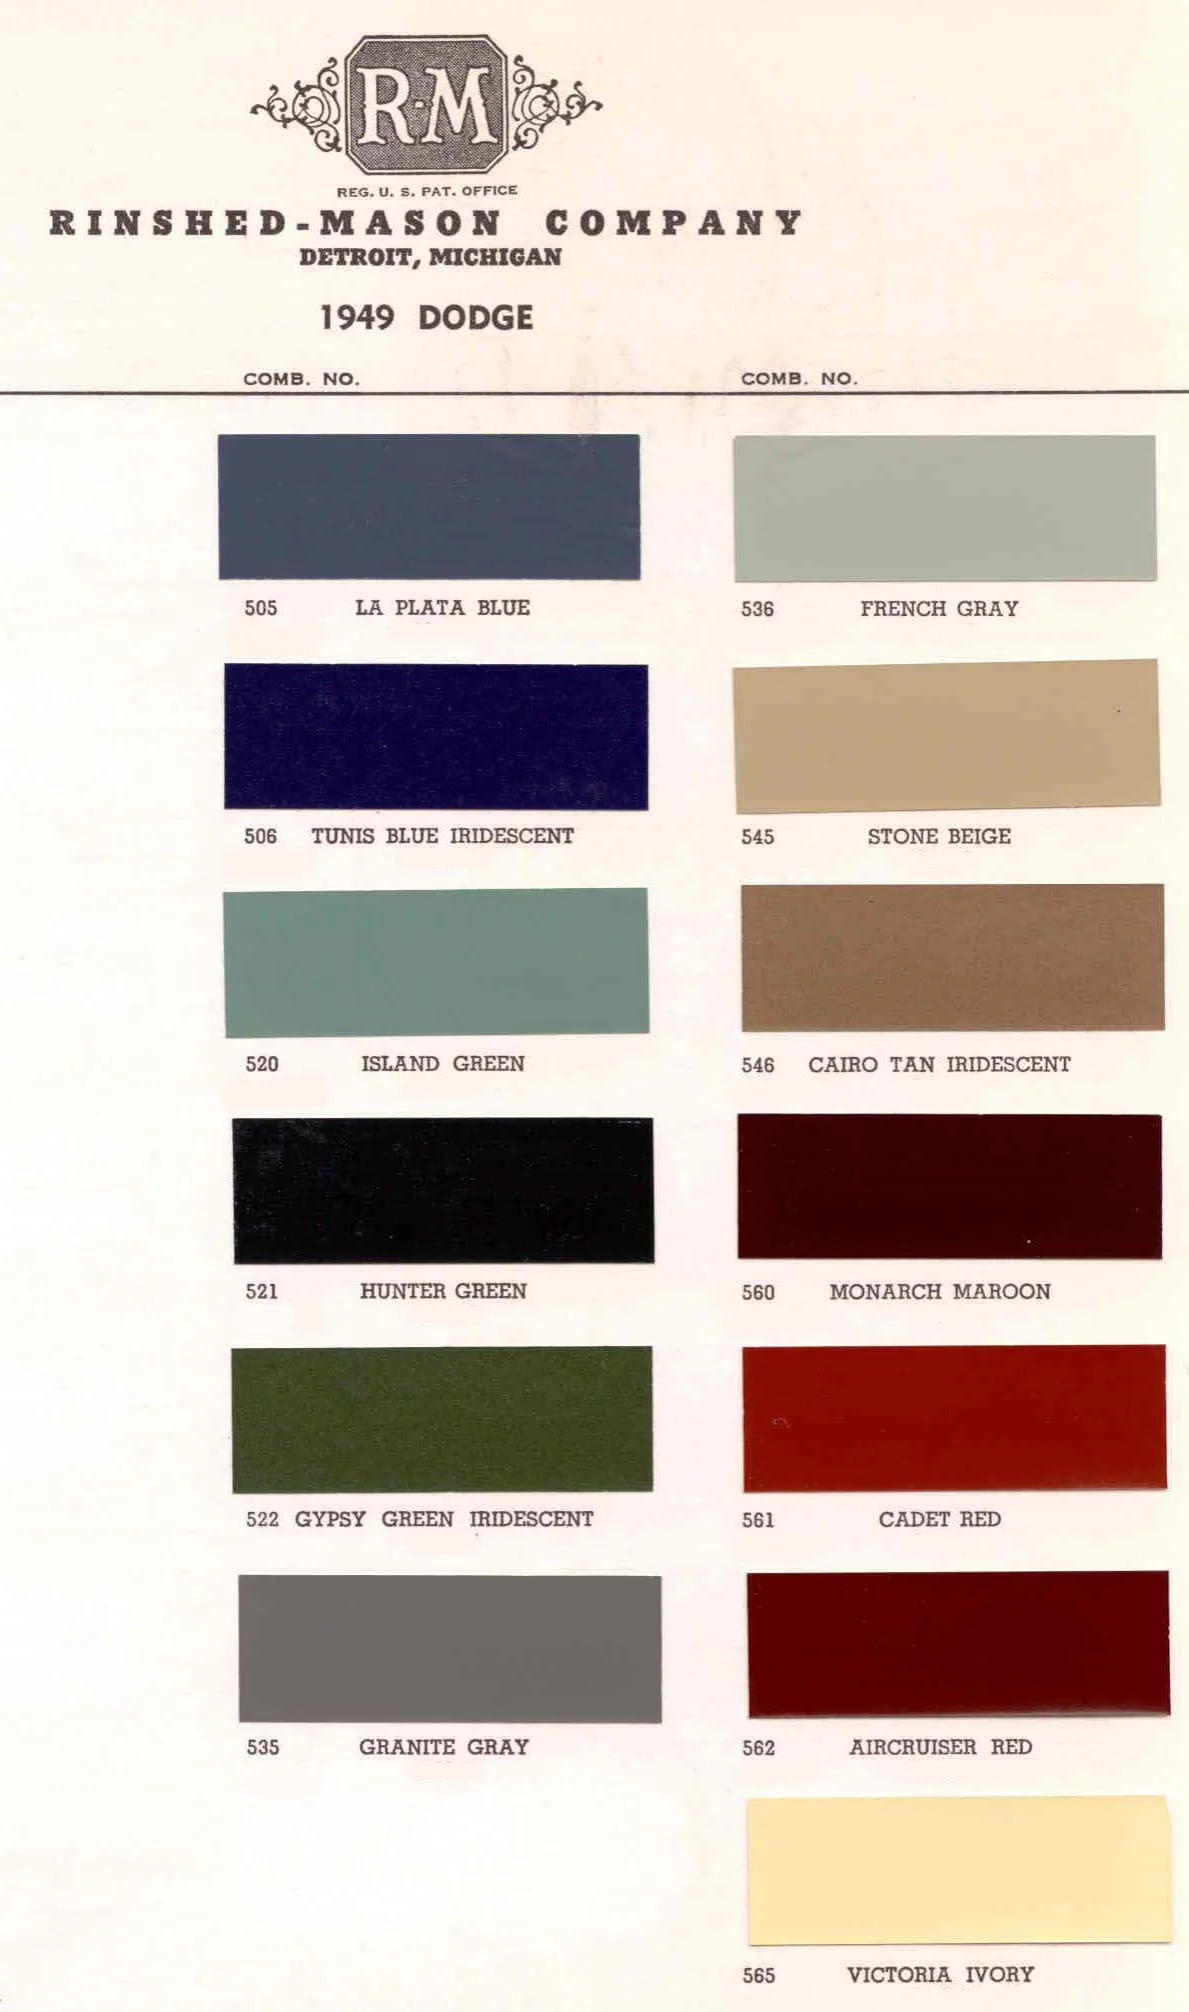 Summary Of Colors used on all Dodge Vehicles in 1949